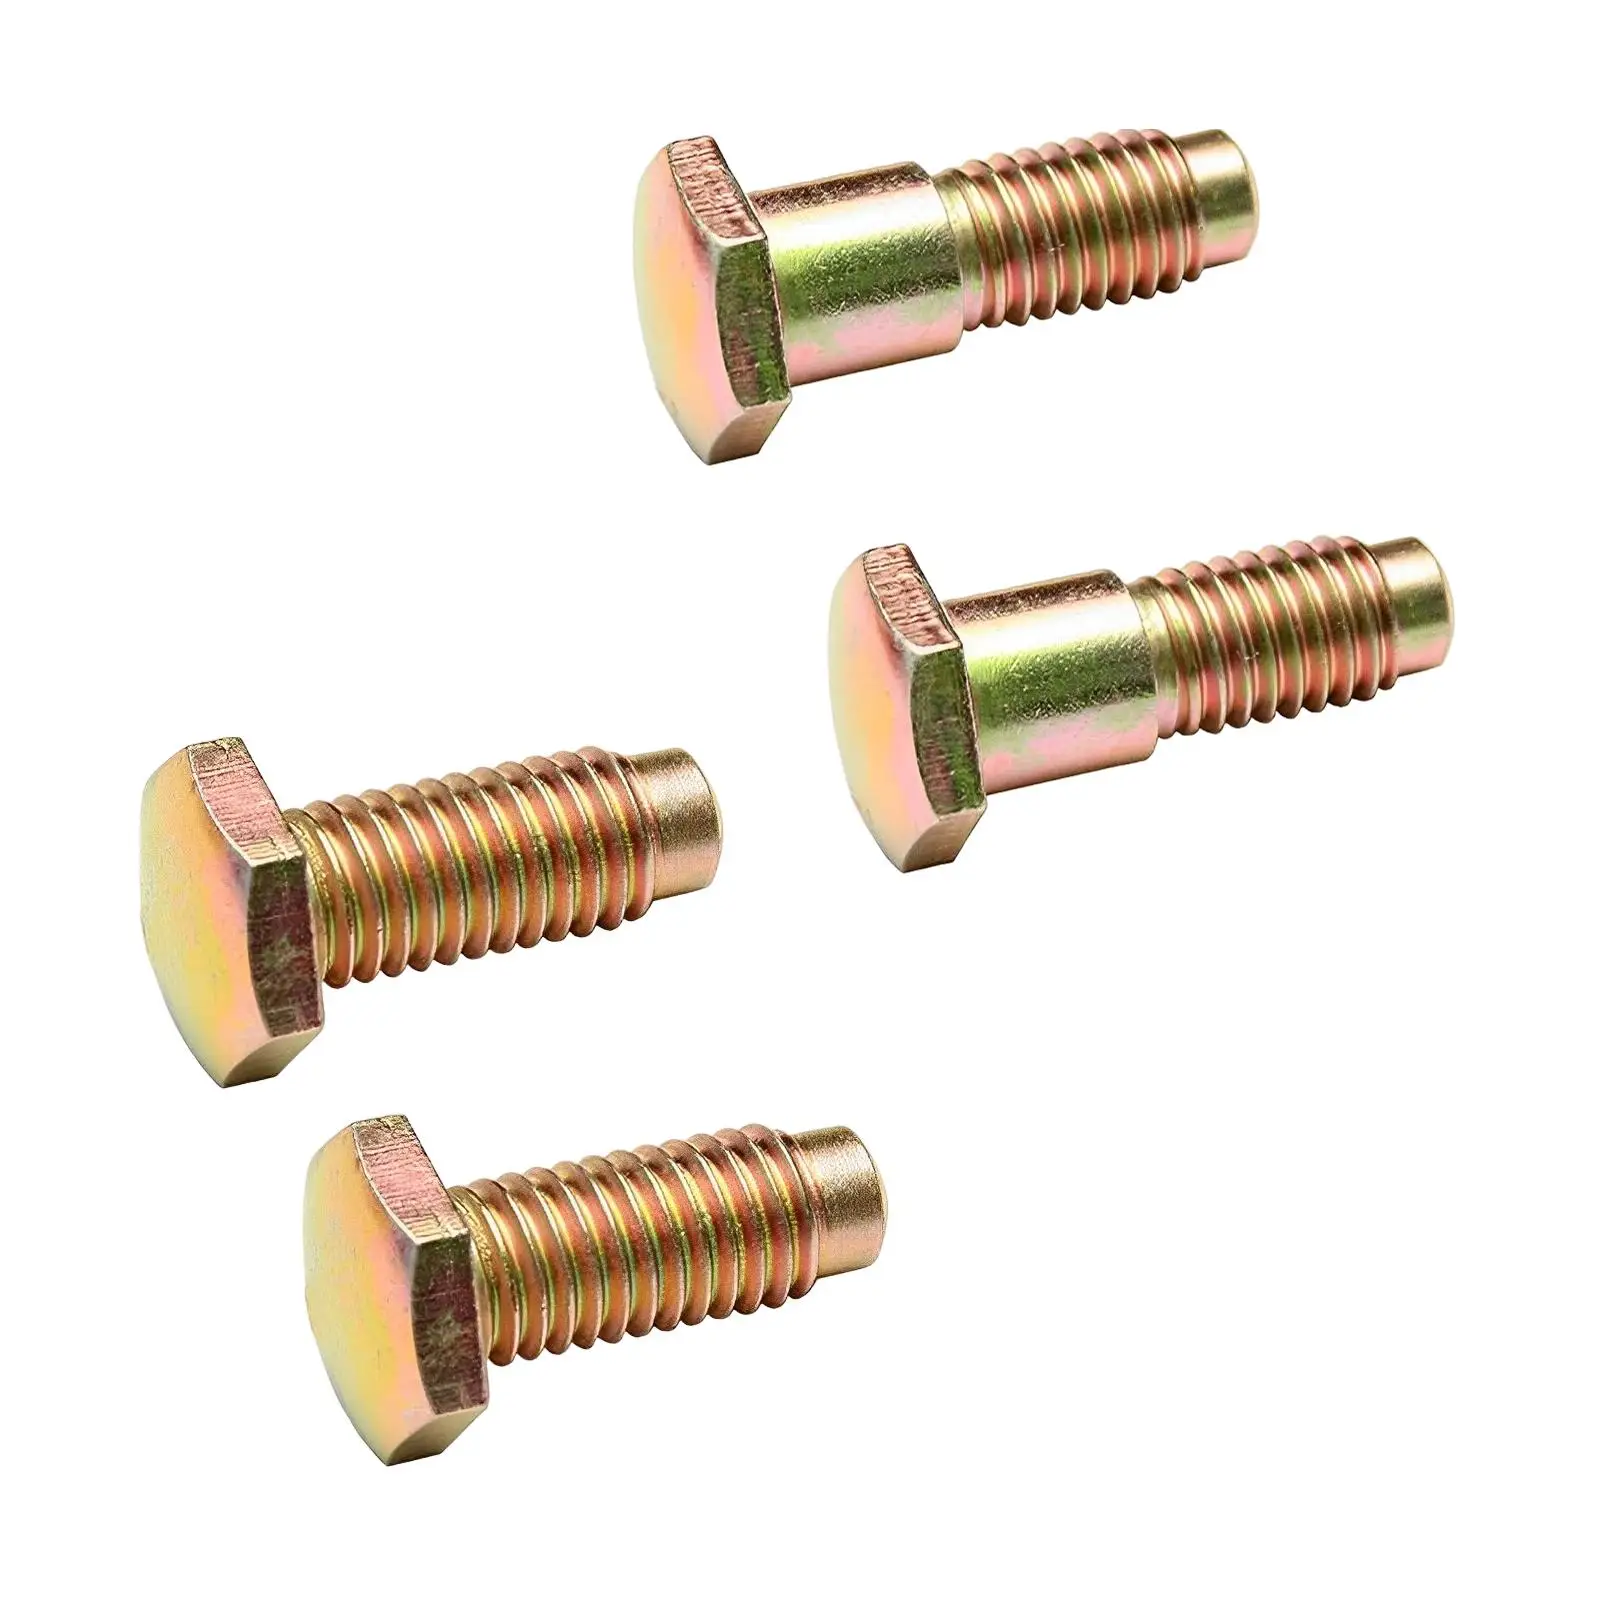 4Pcs Seat Belt Bolts Metal High Performance Car Accessories, Durable Spare Parts , Long and Short Bolts